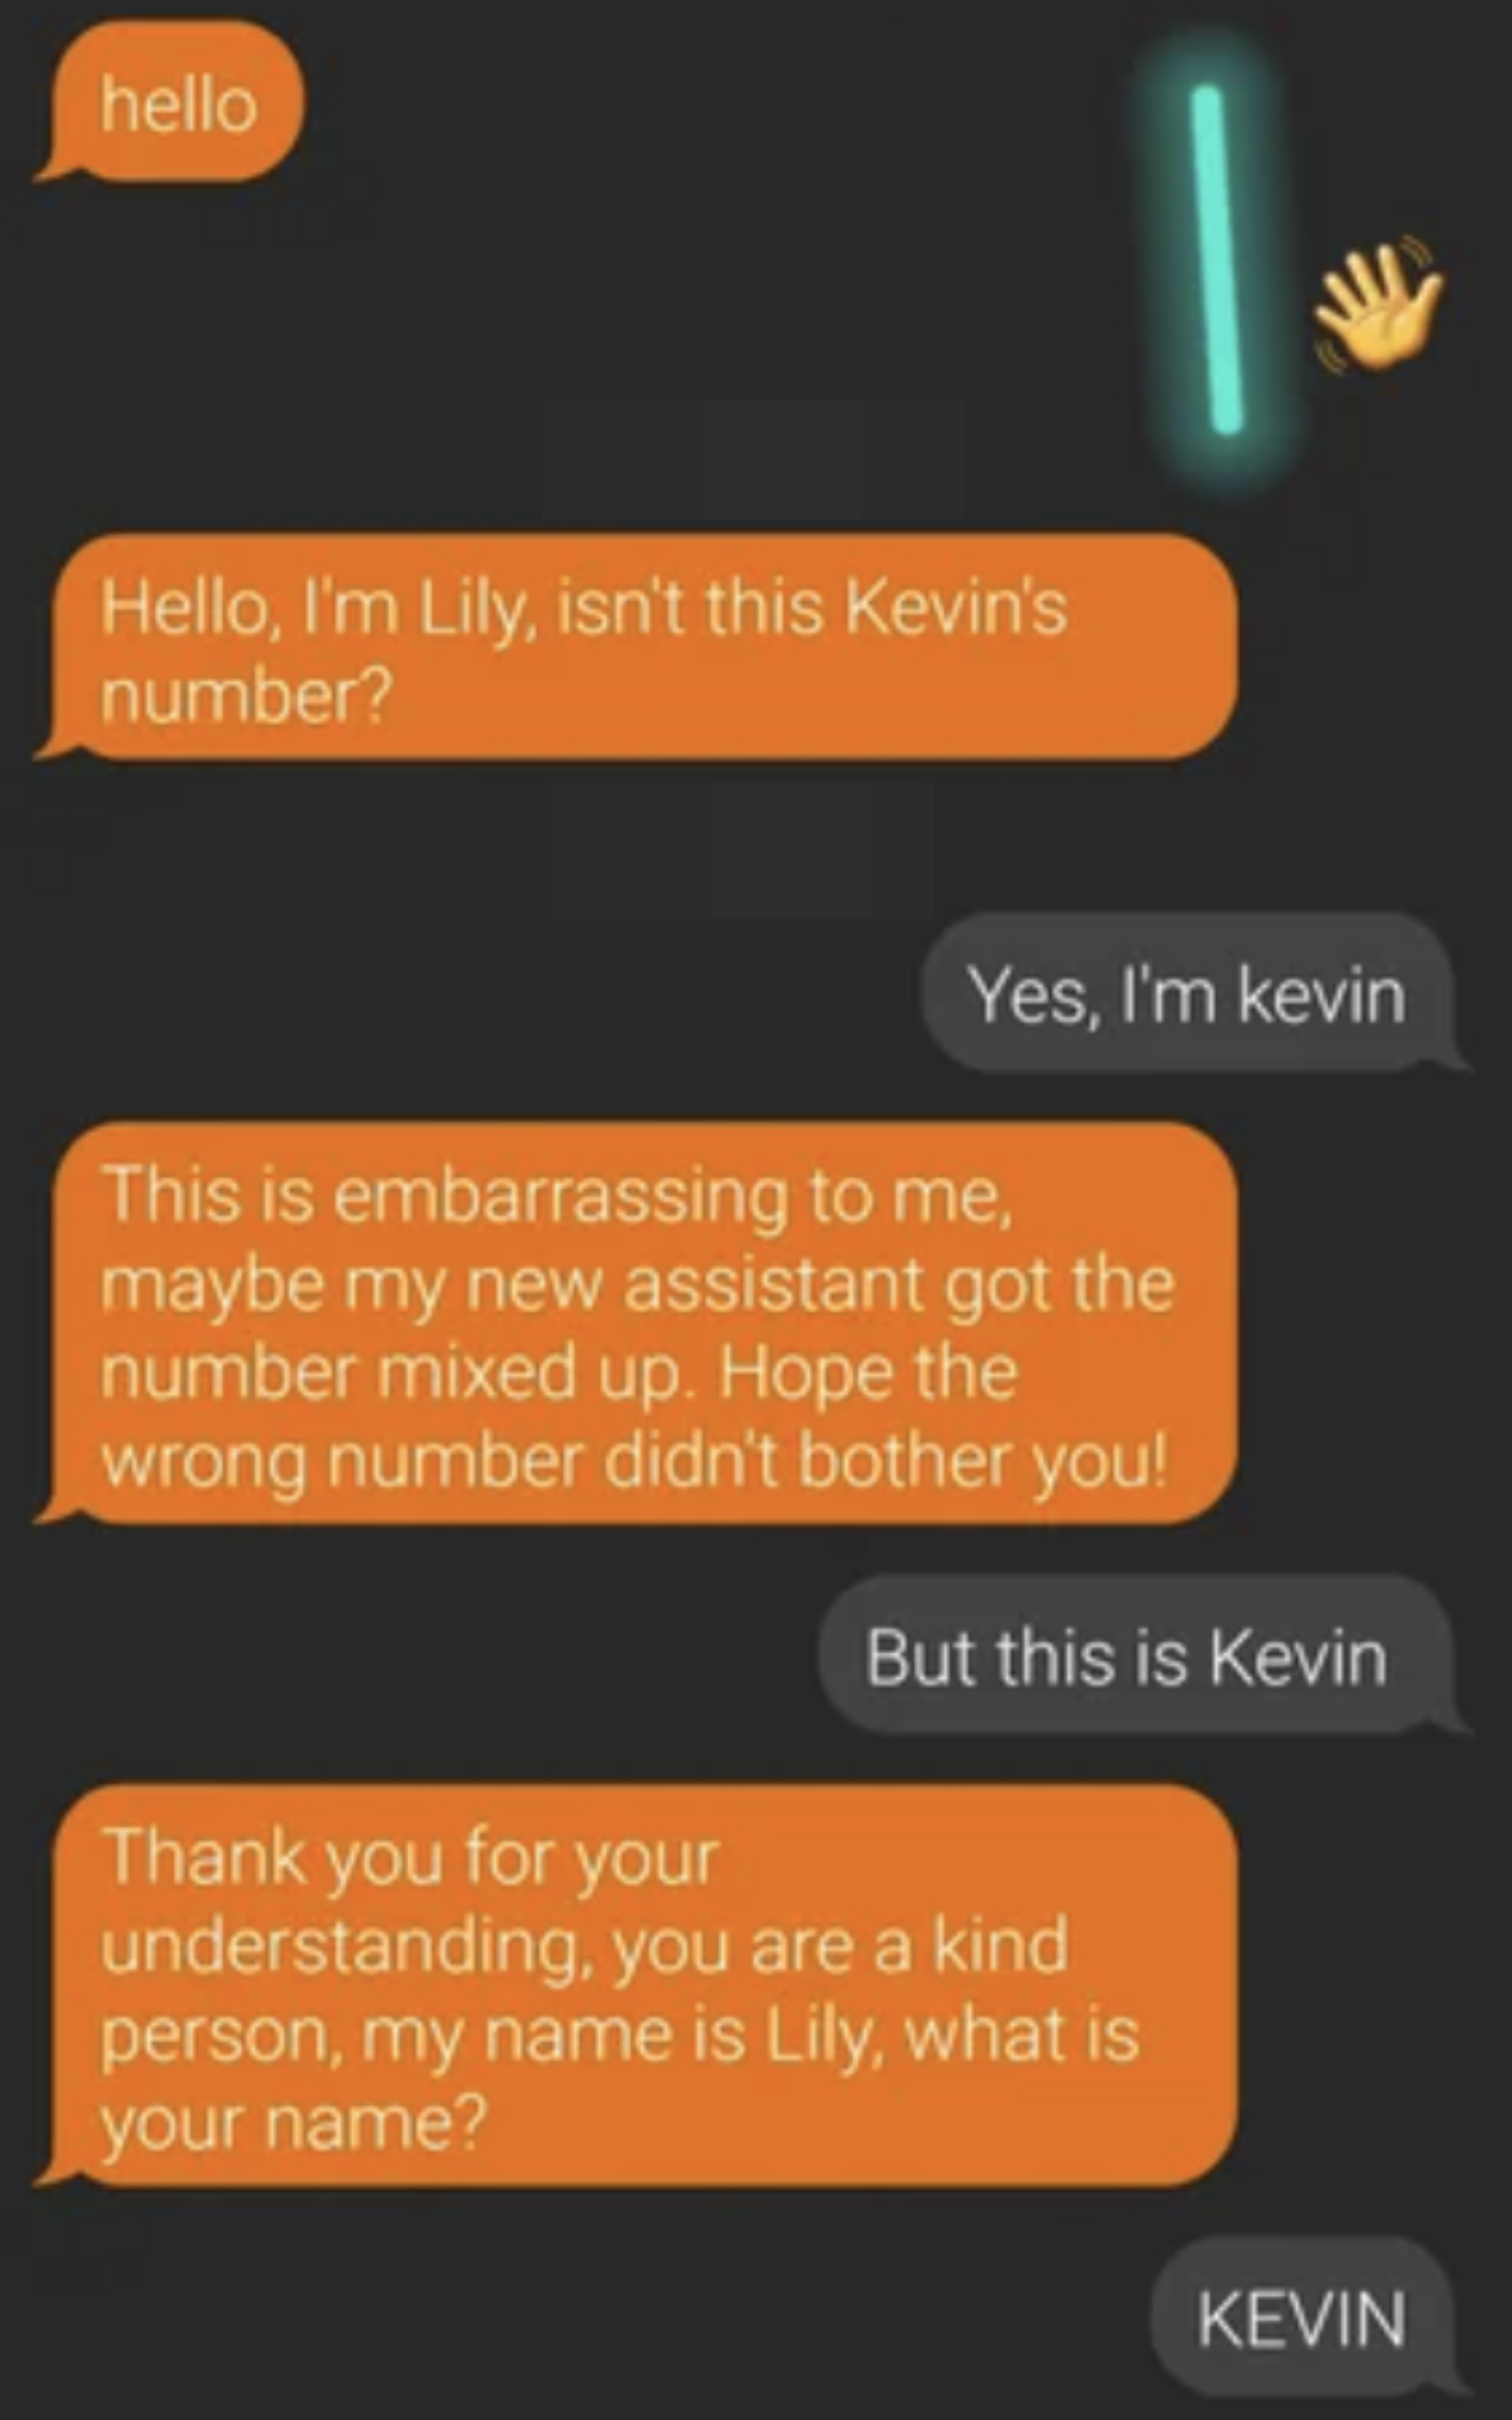 &quot;Hello, I&#x27;m Lily, isn&#x27;t this Kevin&#x27;s number?&quot; &quot;This is embarrassing to me, maybe my new assistant got the number mixed up&quot; and &quot;Thank you for understanding, you are kind, my name is Lily, what is your name?&quot; and person says they&#x27;re Kevin each time